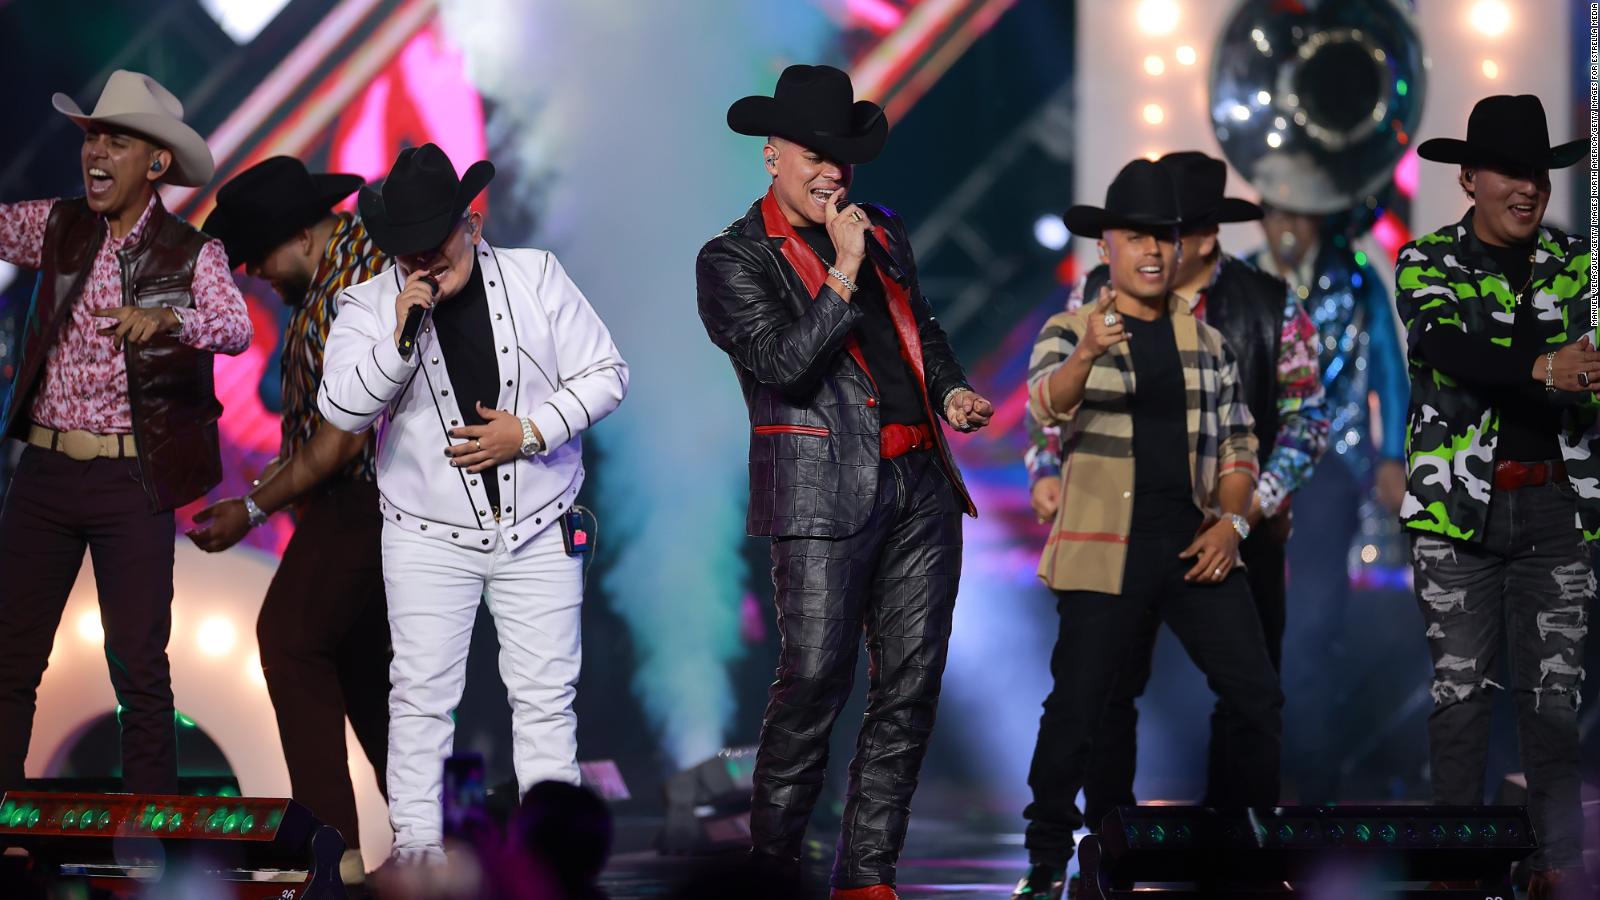 Grupo Firme offers a megaconcert that breaks attendance records in the